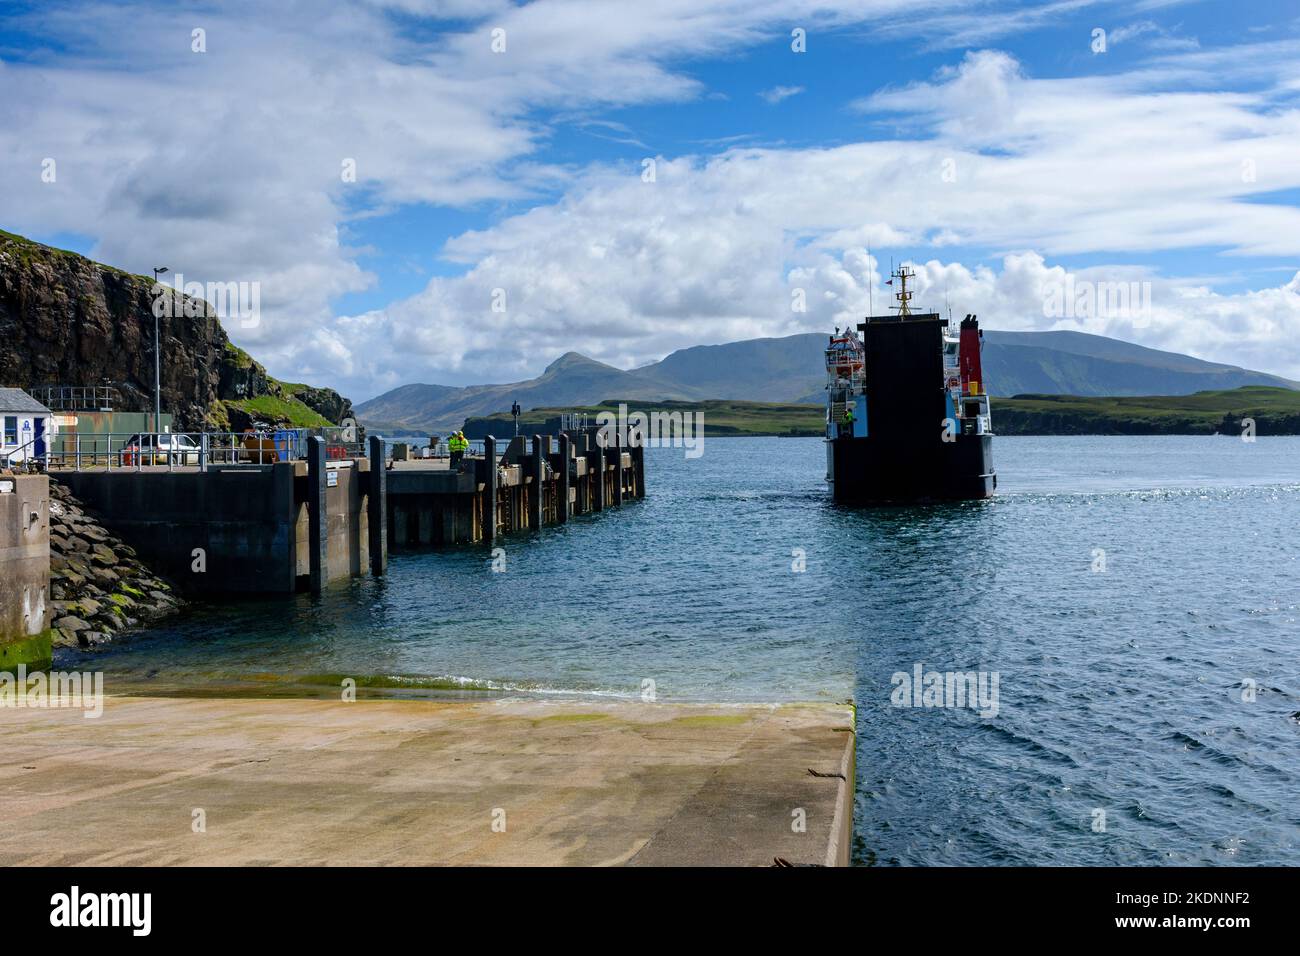 The Caledonian MacBrayne Small Isles ferry, the MV Lochnevis, entering the harbour, Isle of Canna, Scotland, UK.  The mountains of Rum behind. Stock Photo